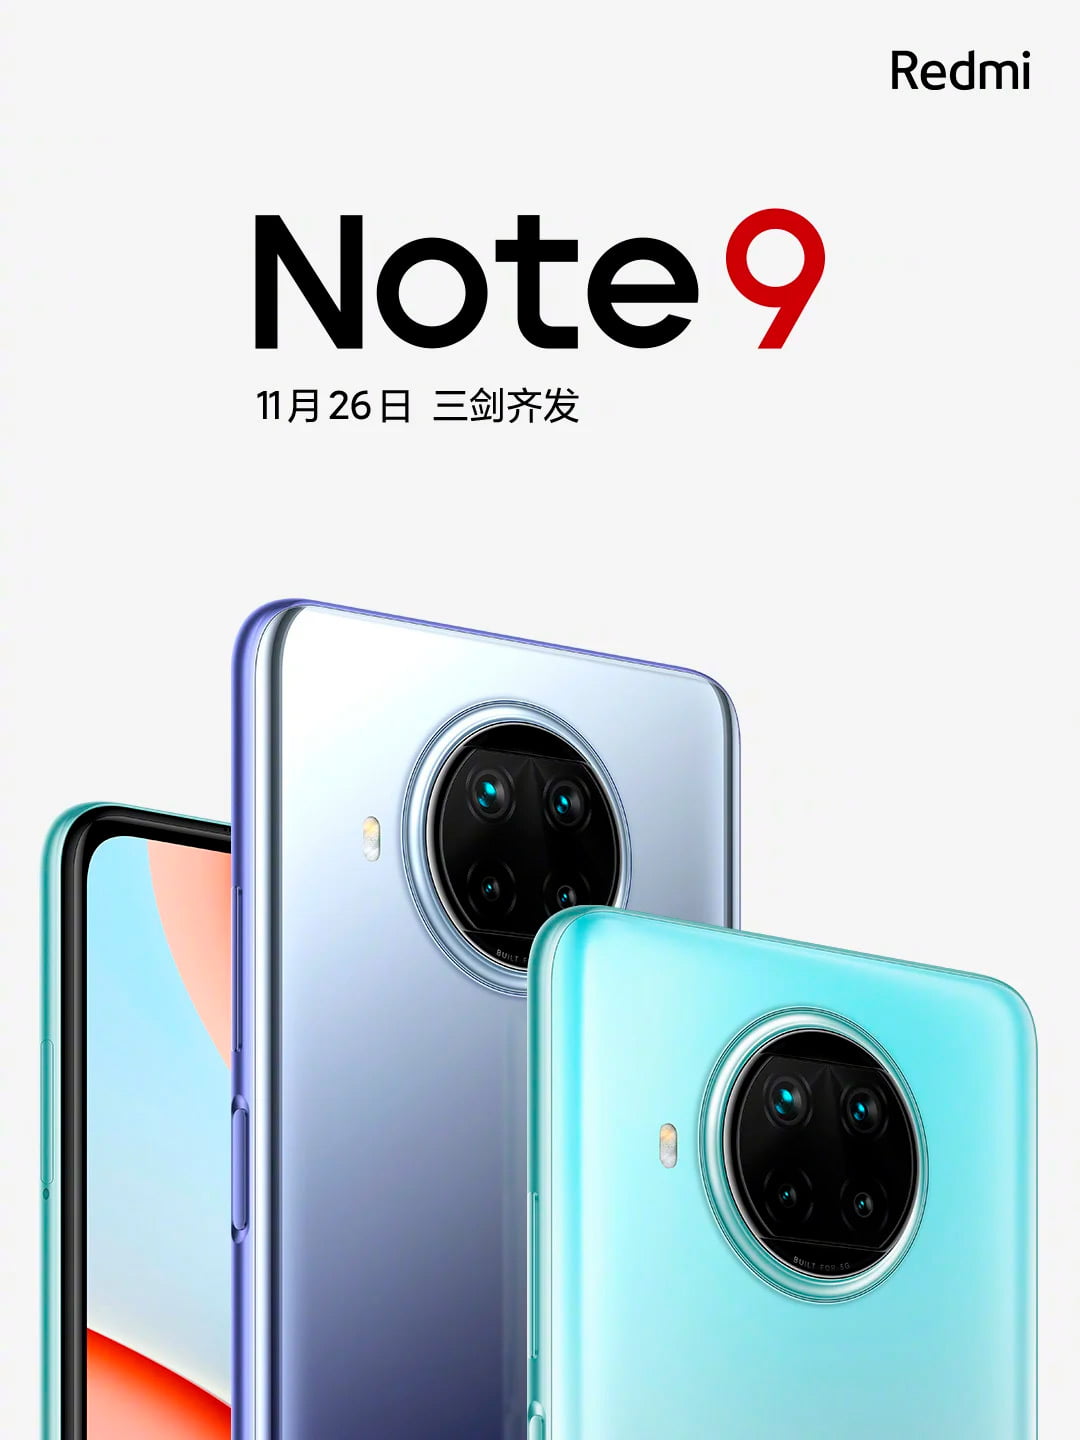 Redmi Note 9 5G edition has a launch date